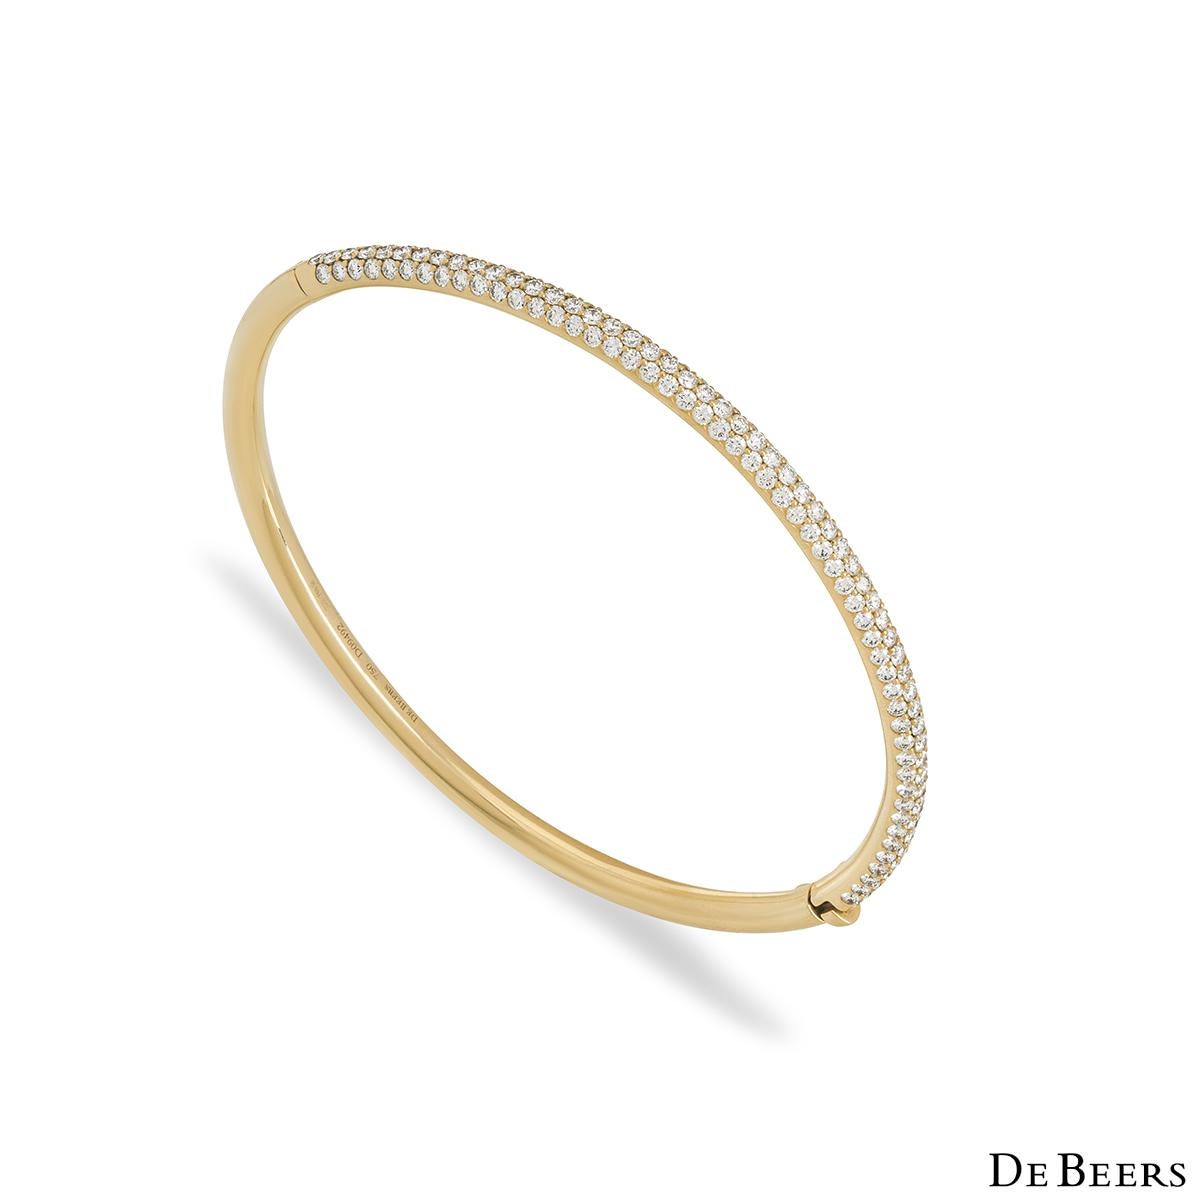 An elegant 18k yellow gold diamond bangle by De Beers from the Classics collection. The bangle features 162 micropave set round brilliant cut diamonds totalling 2.03ct, predominately F-G colour and VS+ clarity. The bangle fits a wrist up to 16cm,